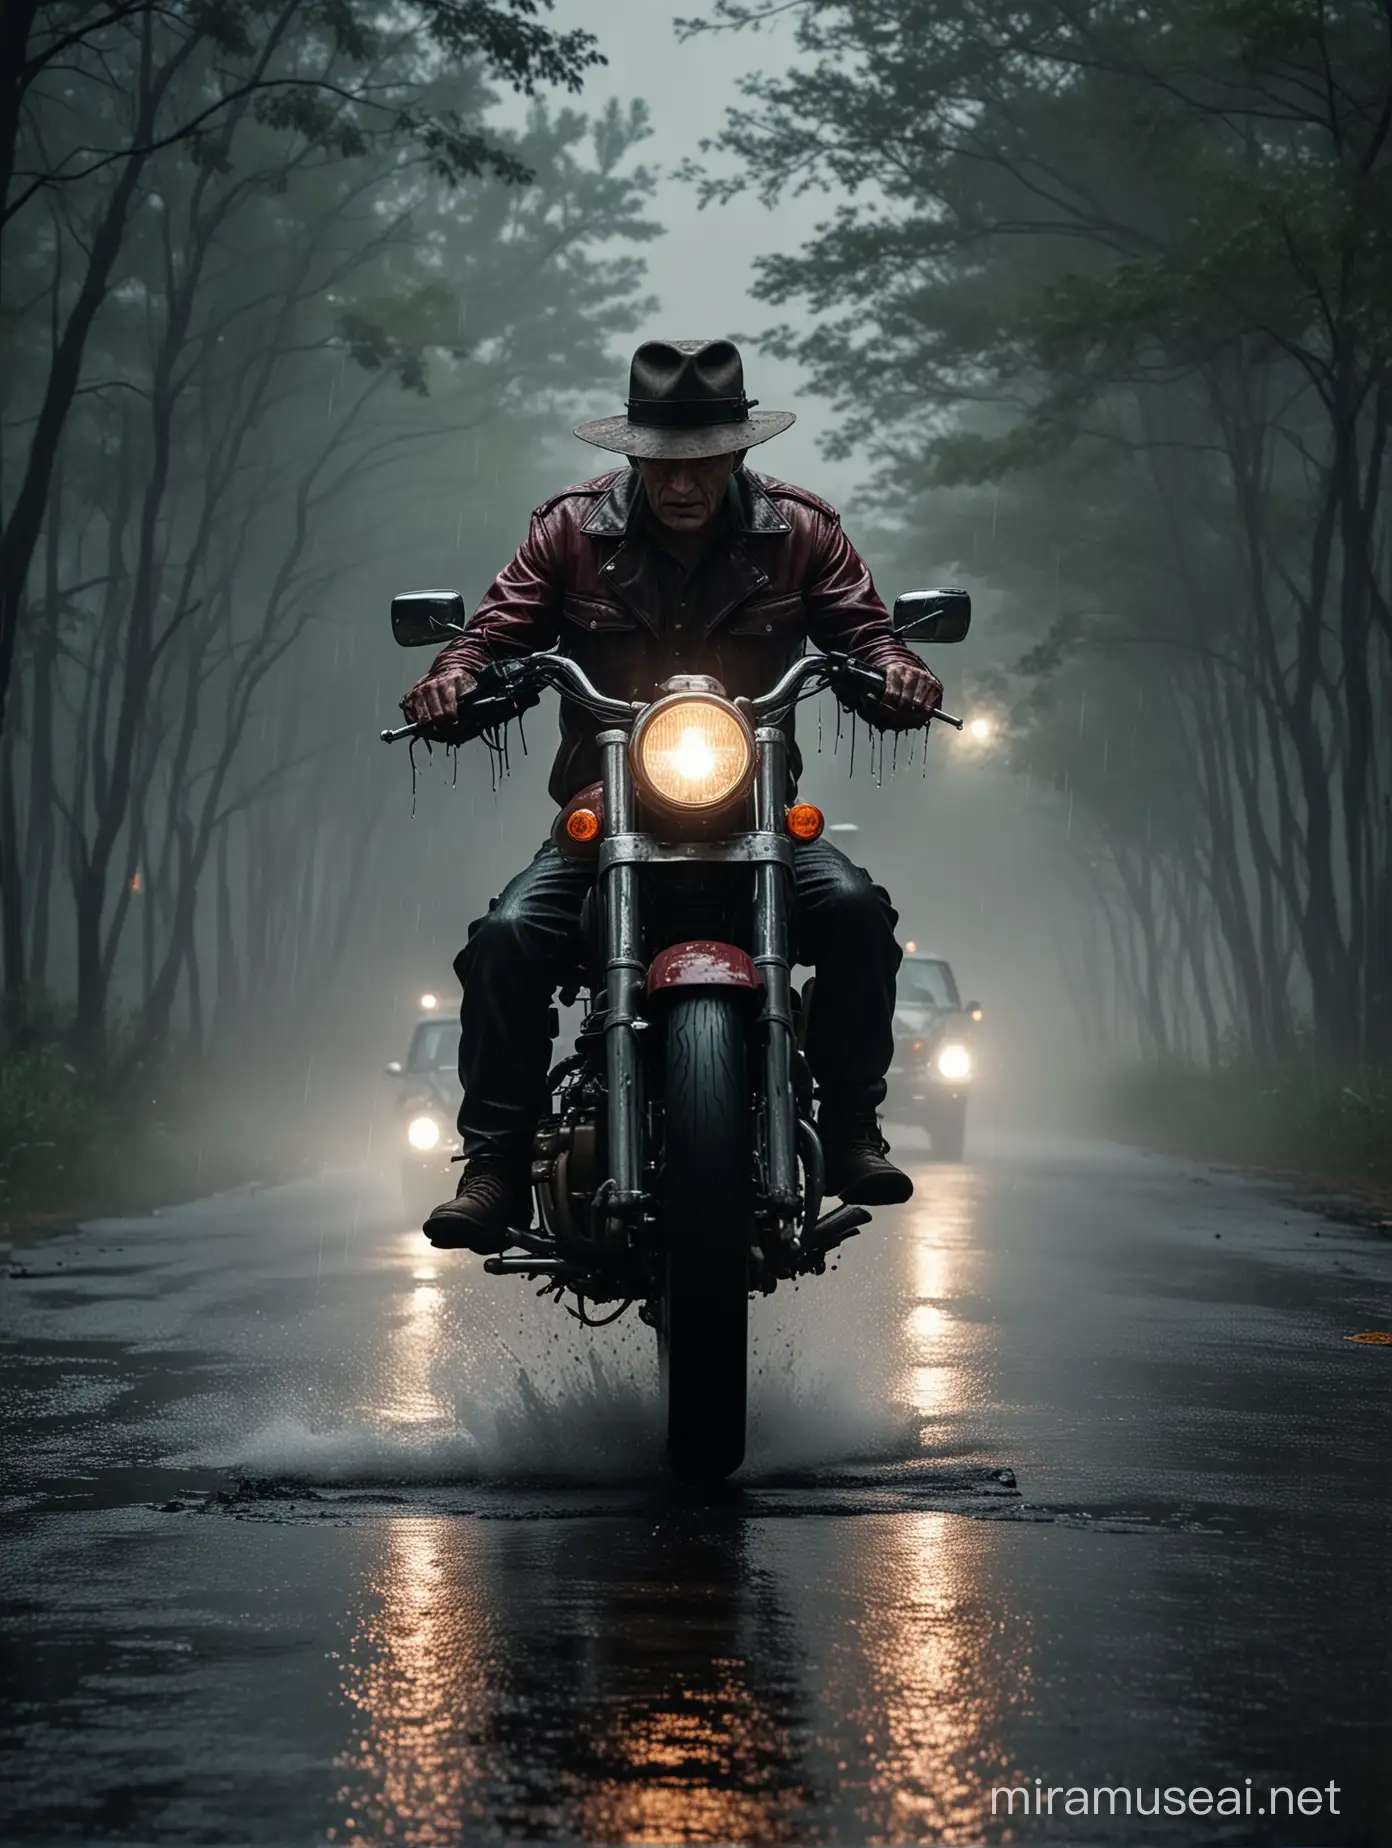 Wide shot front view Photography realistic cinematic colors natural color of full body freddy Kruger horror movie character on driving big classic motorcycle,on the way long road,drifting fast spray water roads in the darkness night forest and darkness strom hard rainy night sky,scene cinematography street photography nikon dslr